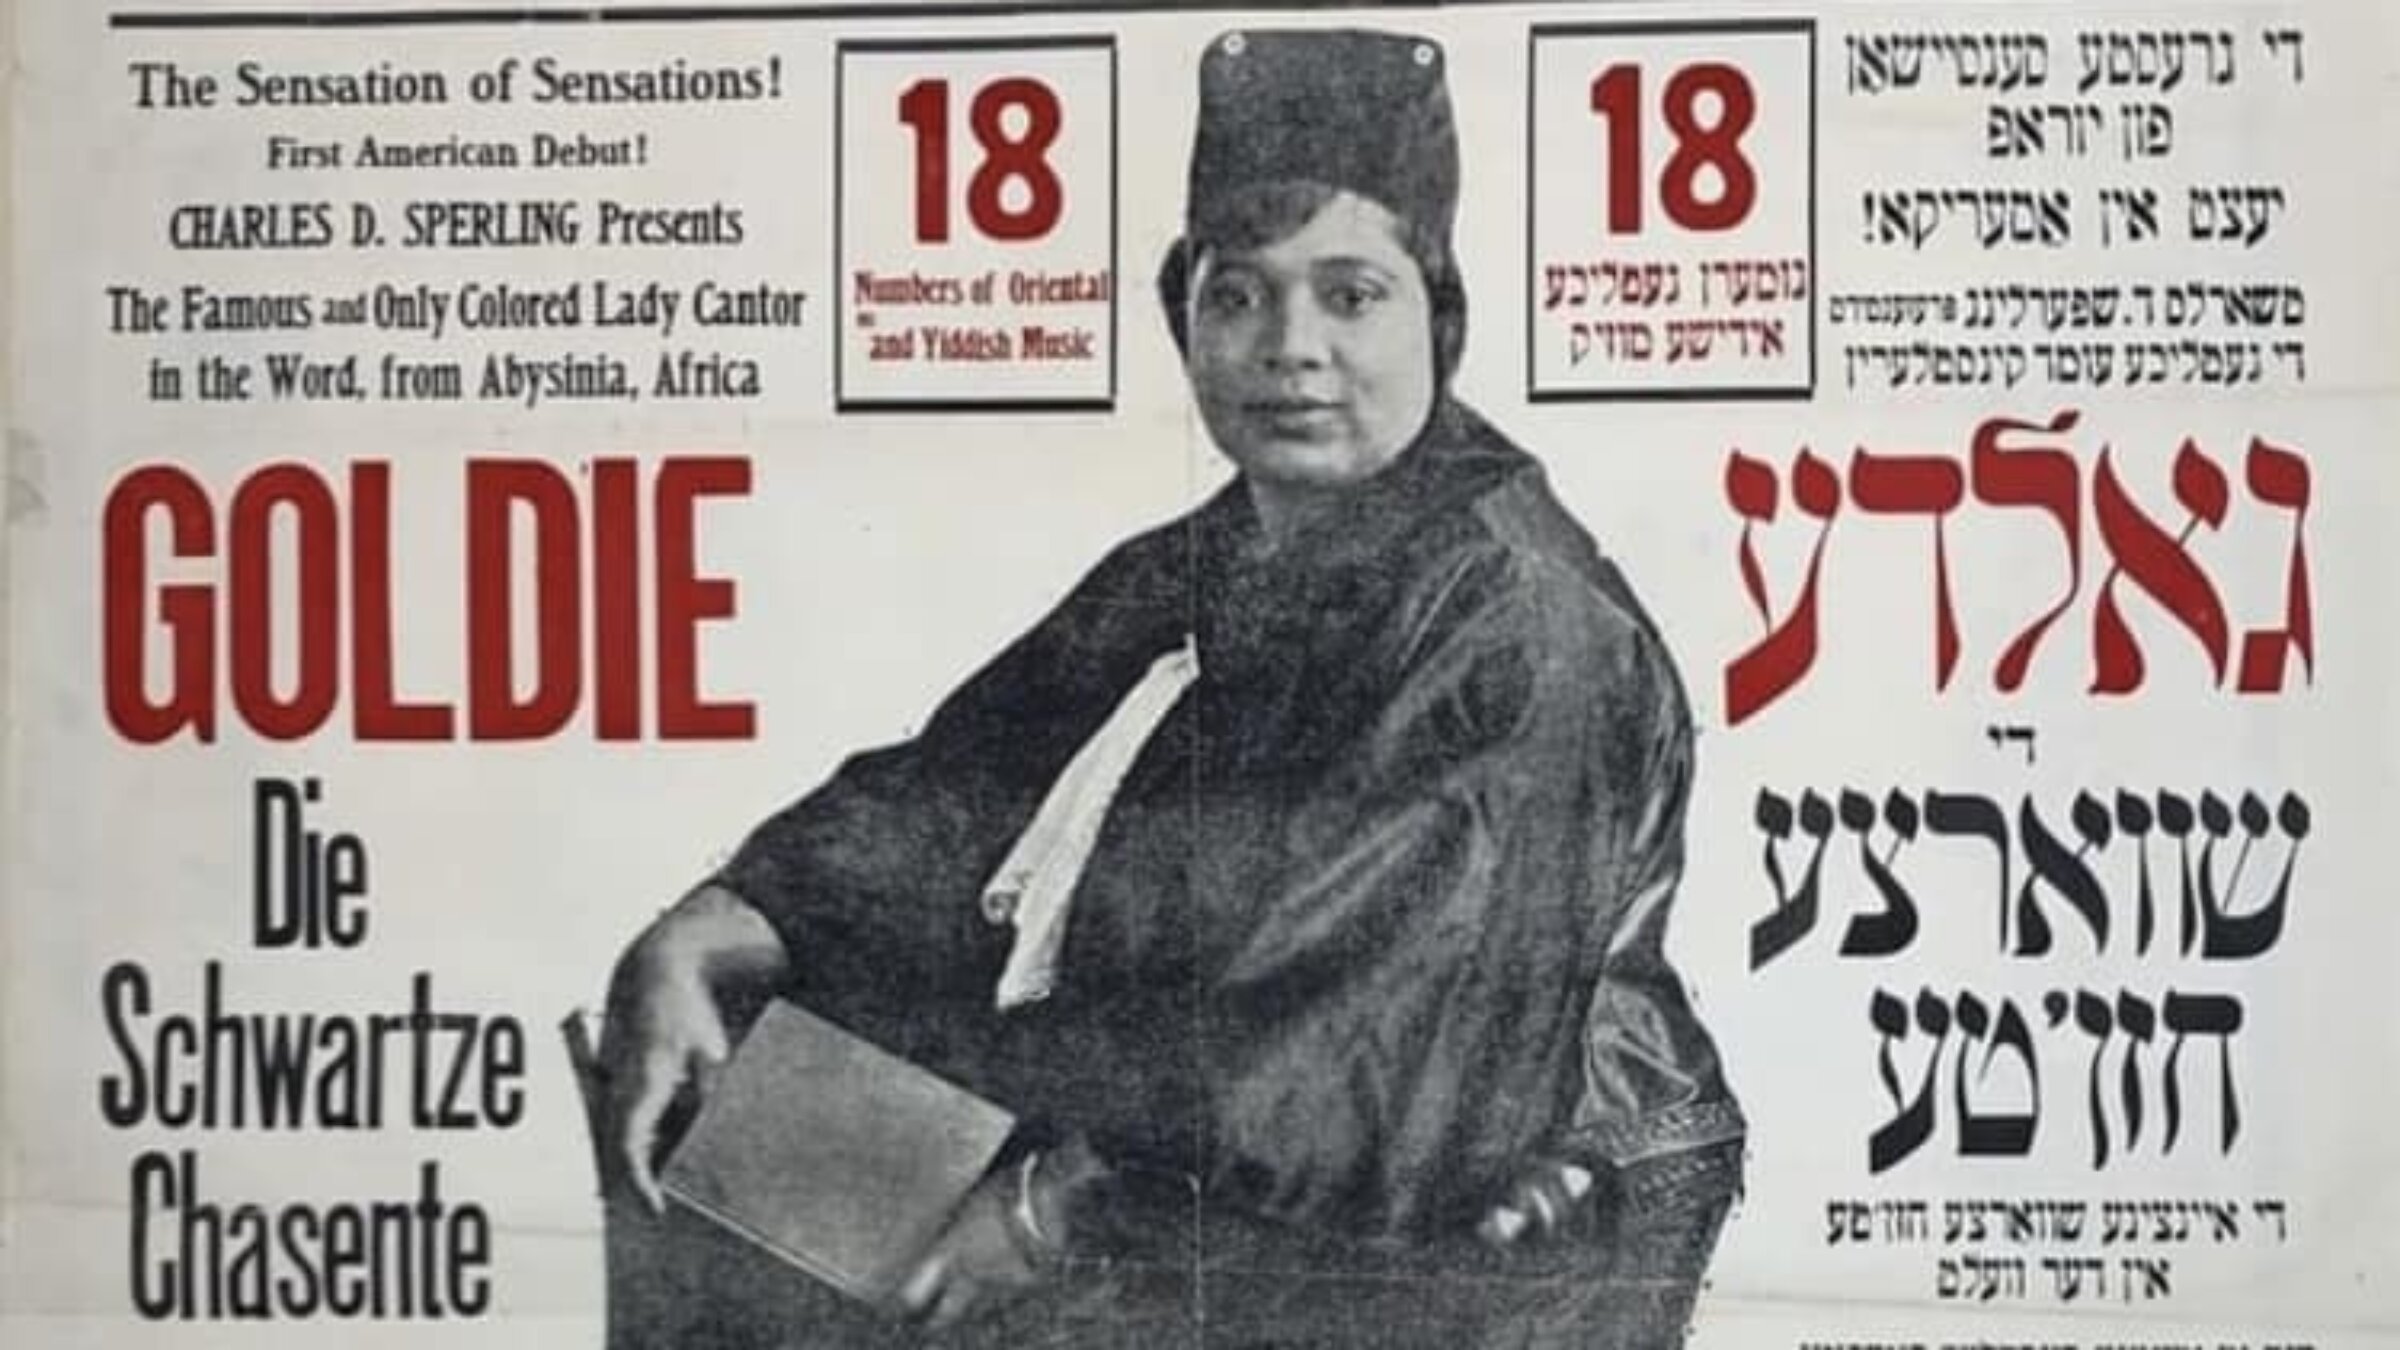 This World War I era advertisement in Pittsburgh's Jewish Criterion features Goldye Steiner as "The famous and only Colored Lady Cantor in the word (sic)," A century later, she is being portrayed by Shahanna McKinney-Baldon.